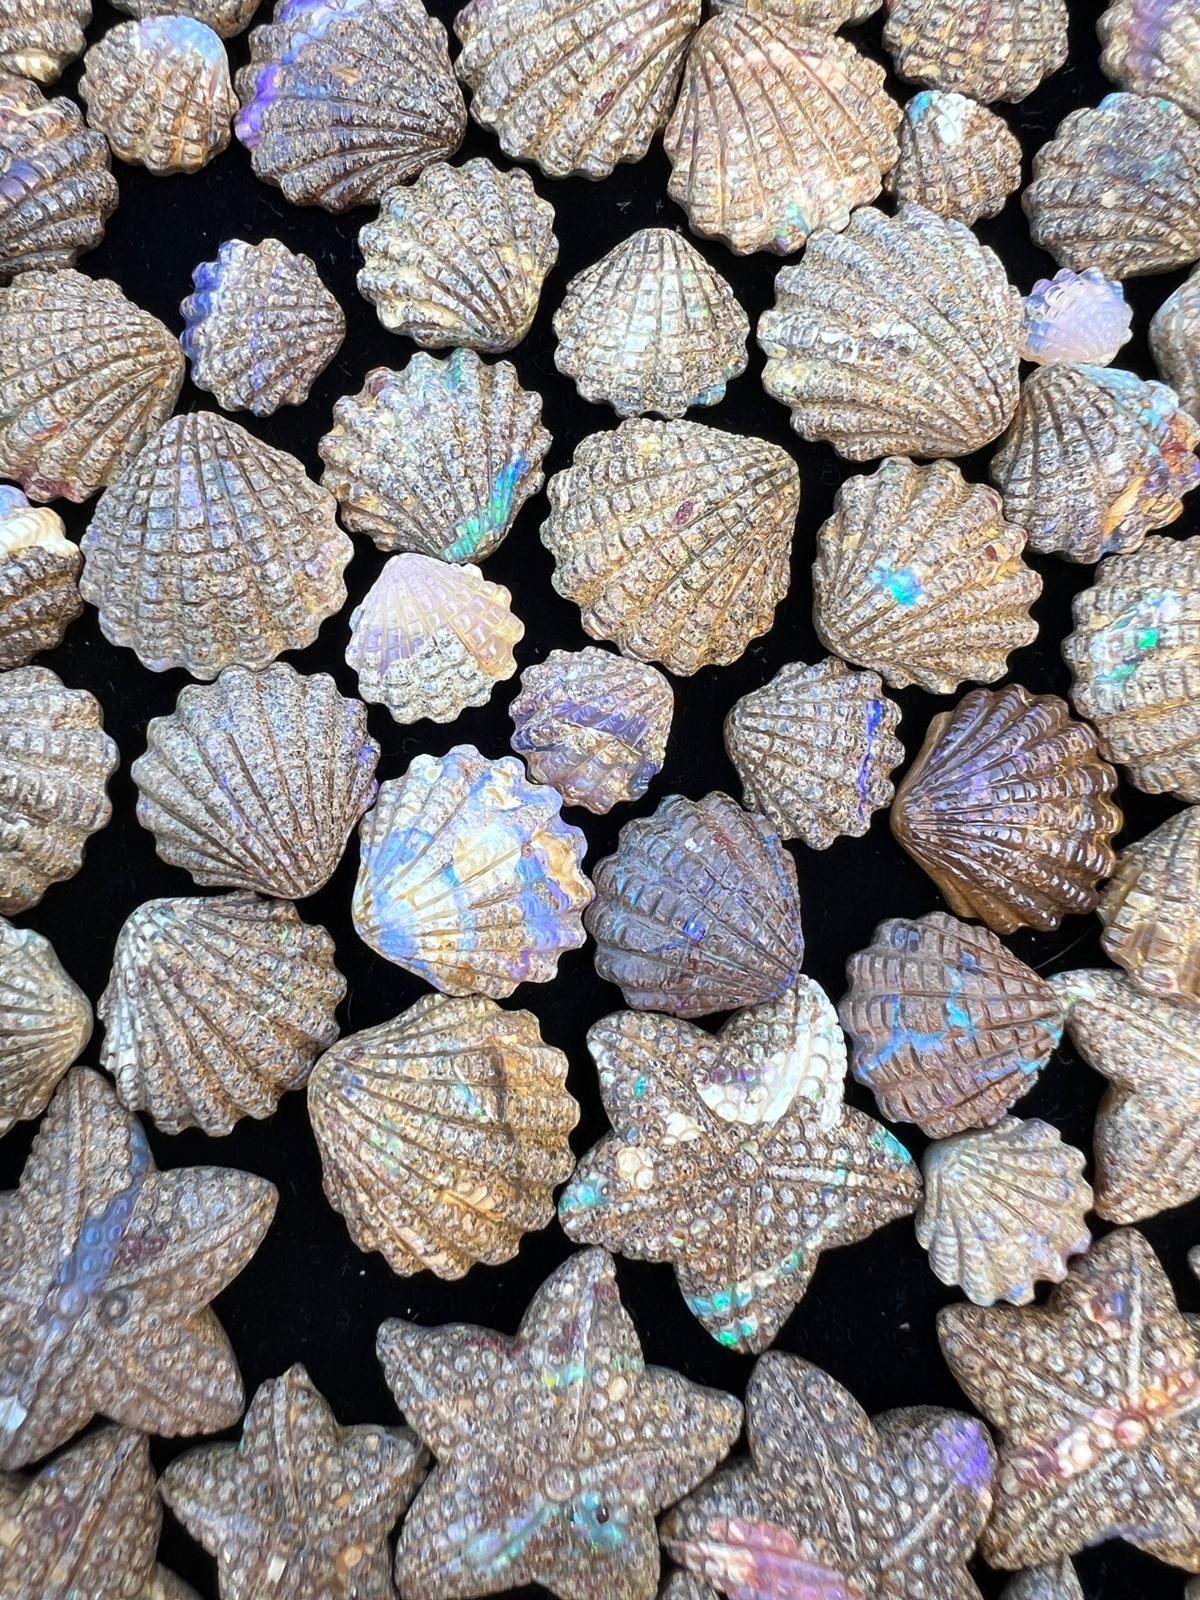 Exquisite 3.64 Ct Australian Boulder Opal Matrix Scallop Shell Carving =Handcrafted Rarity and Symbolism